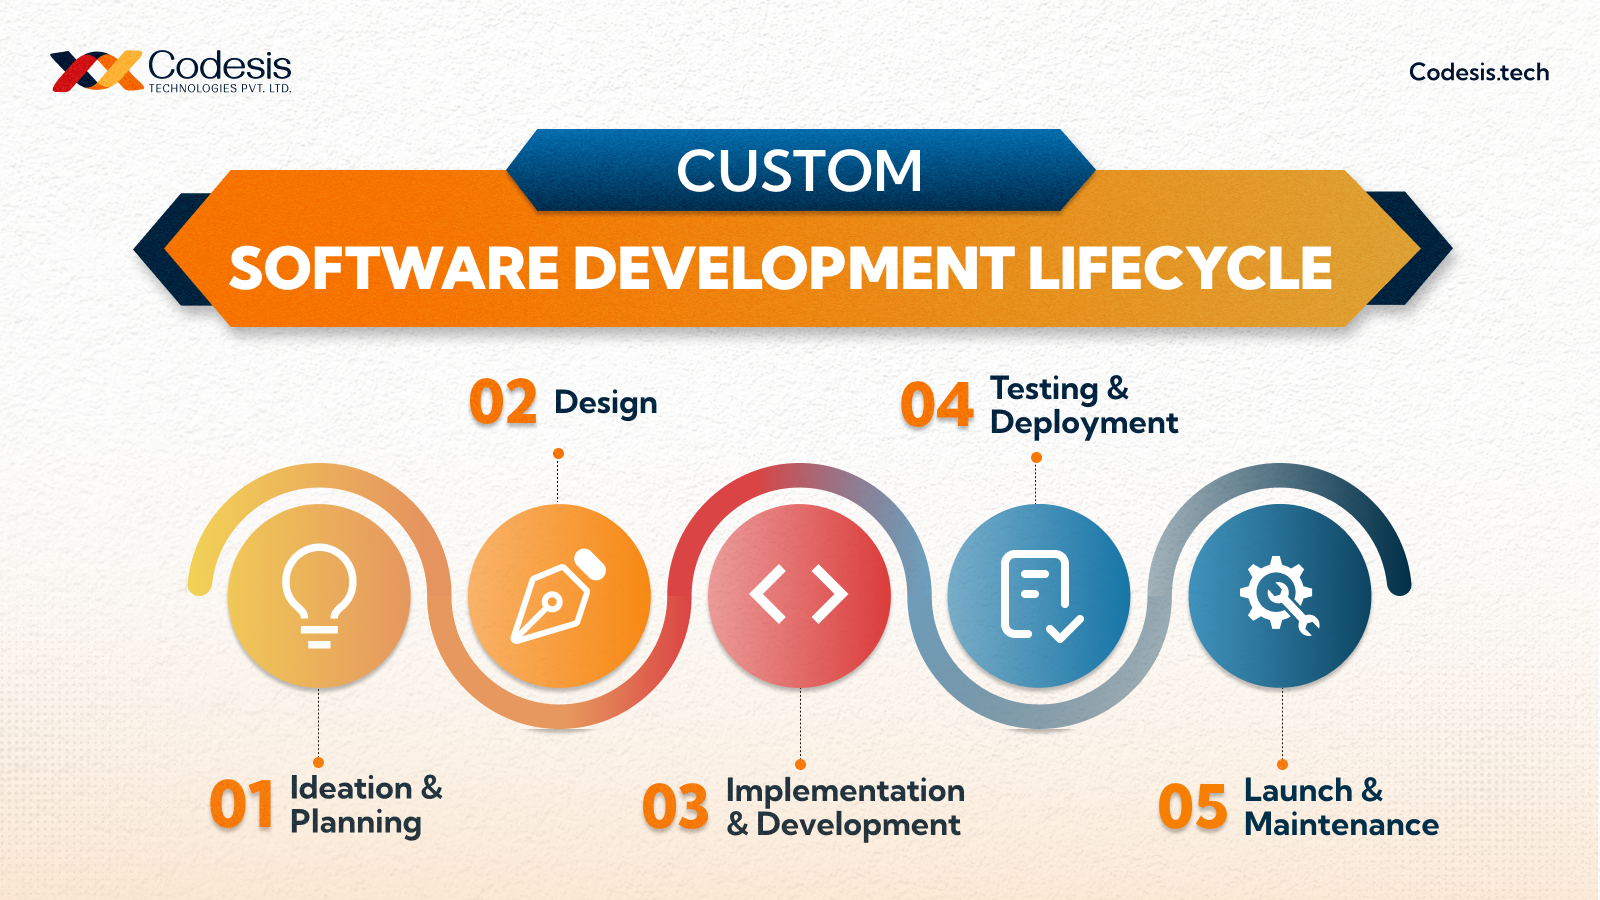 an image showing 5 stages of custom software development lifecycle and process with a codesis logo on top